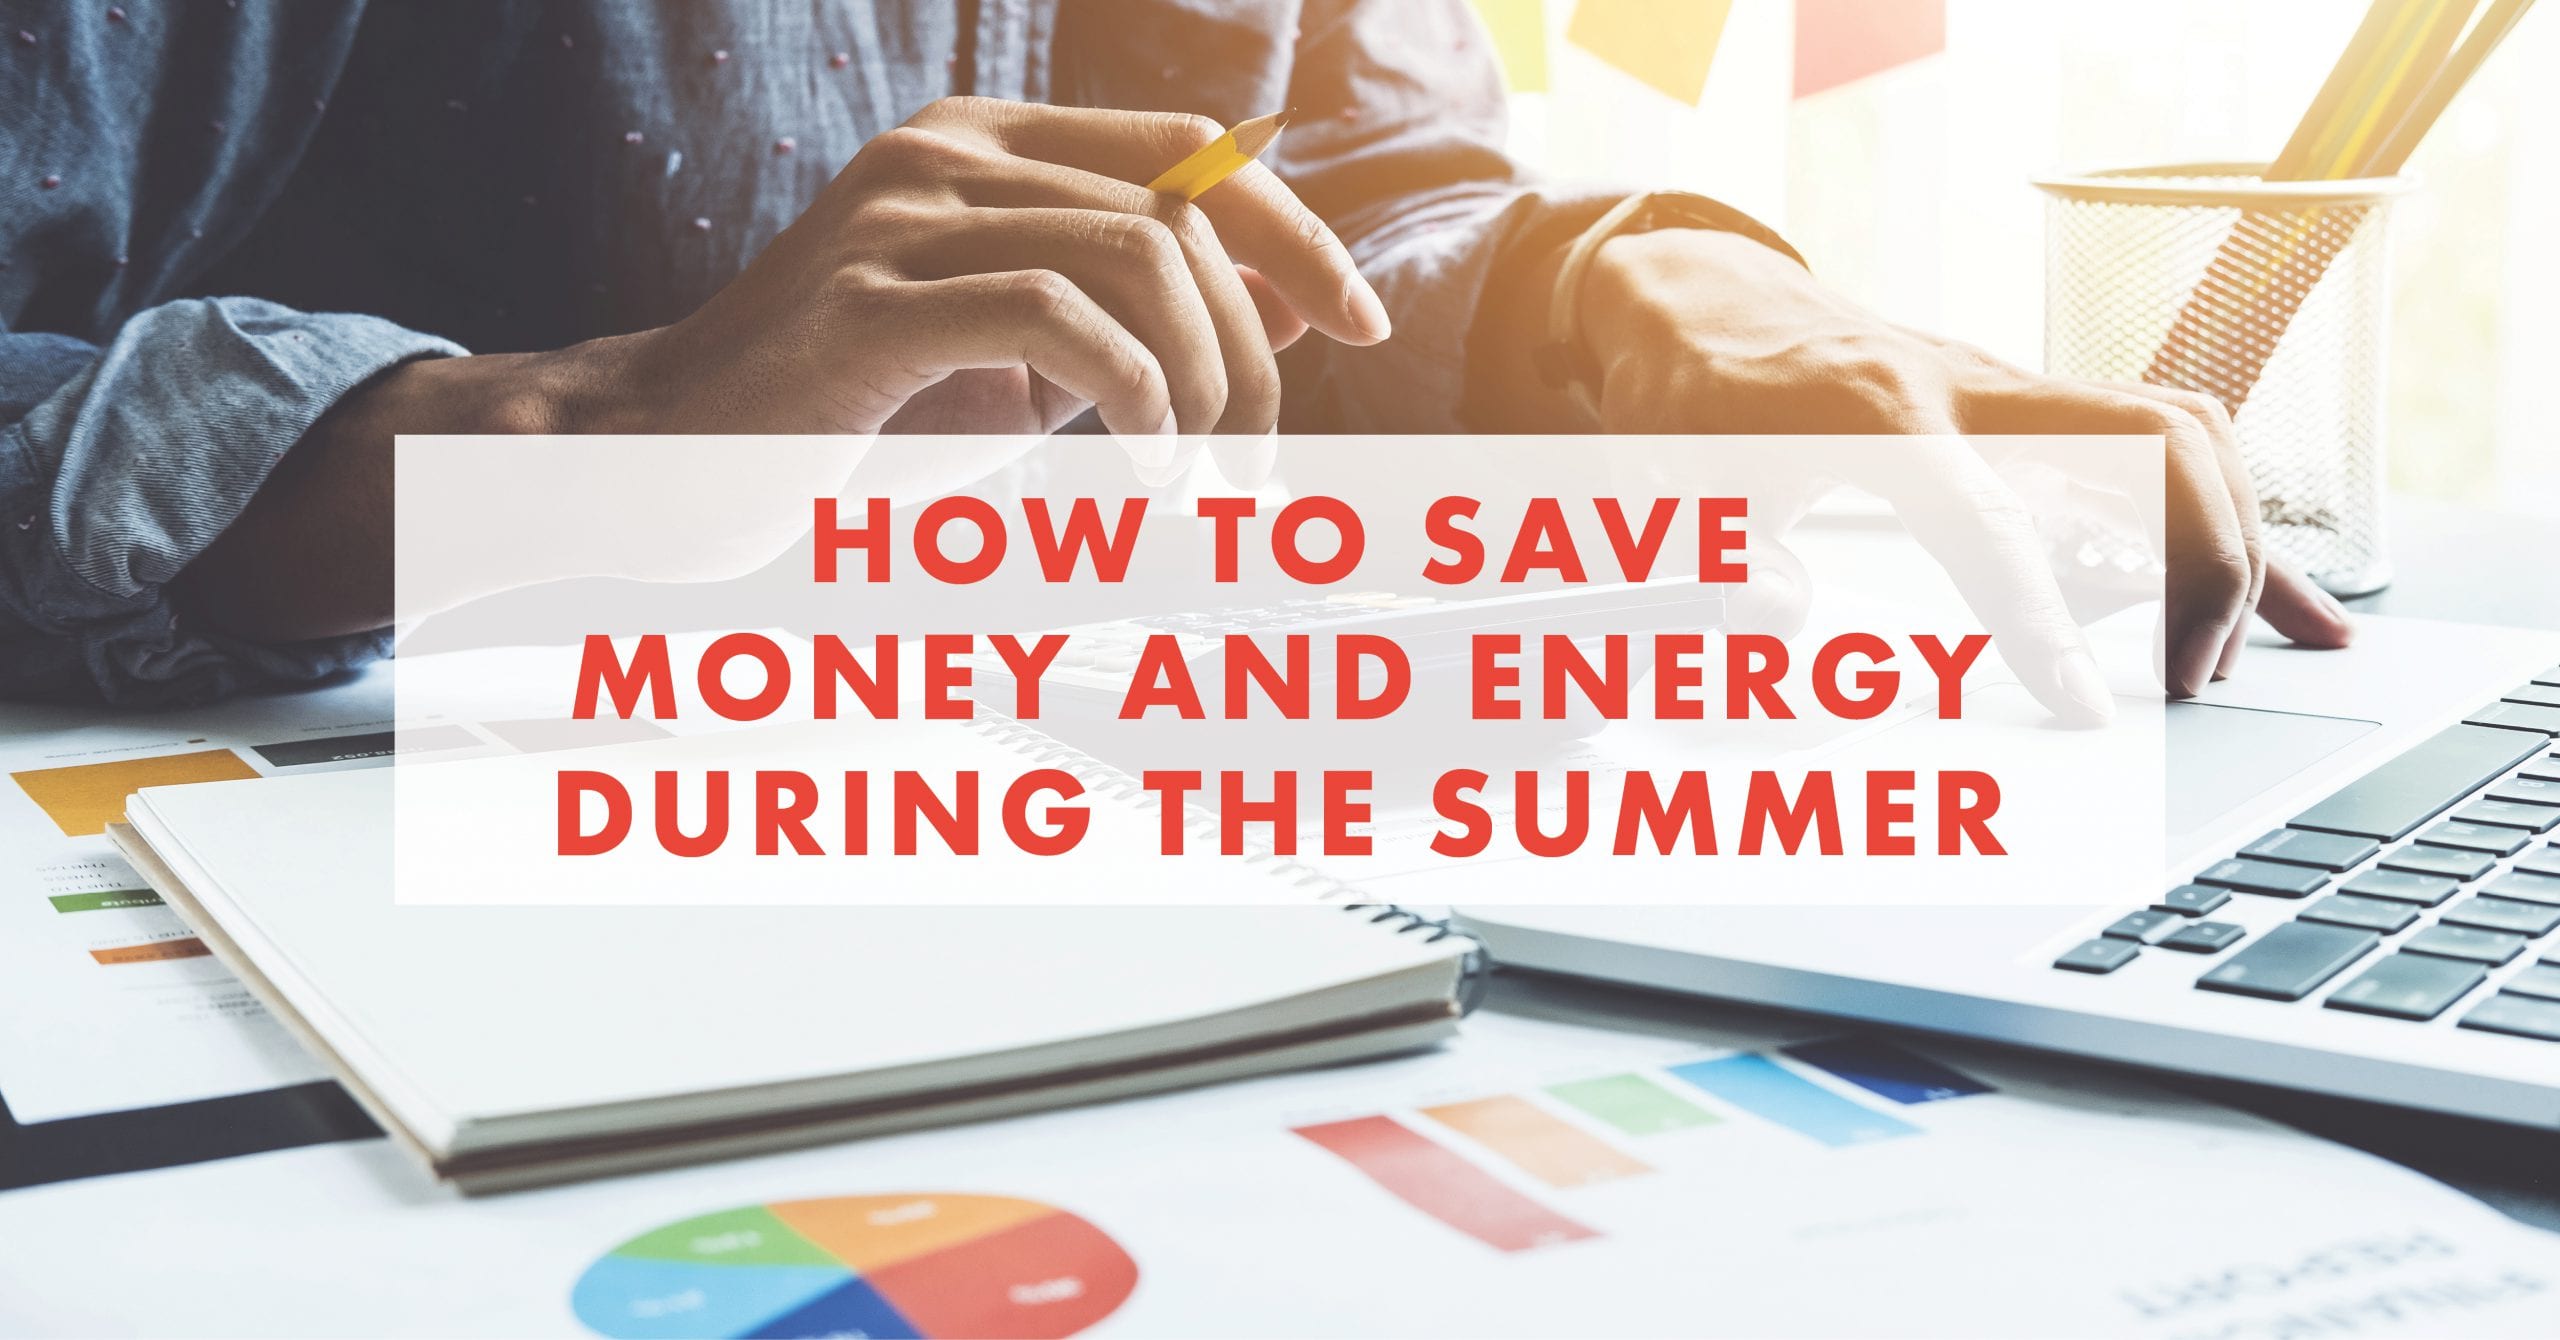 How to Save Money and Energy During the Summer